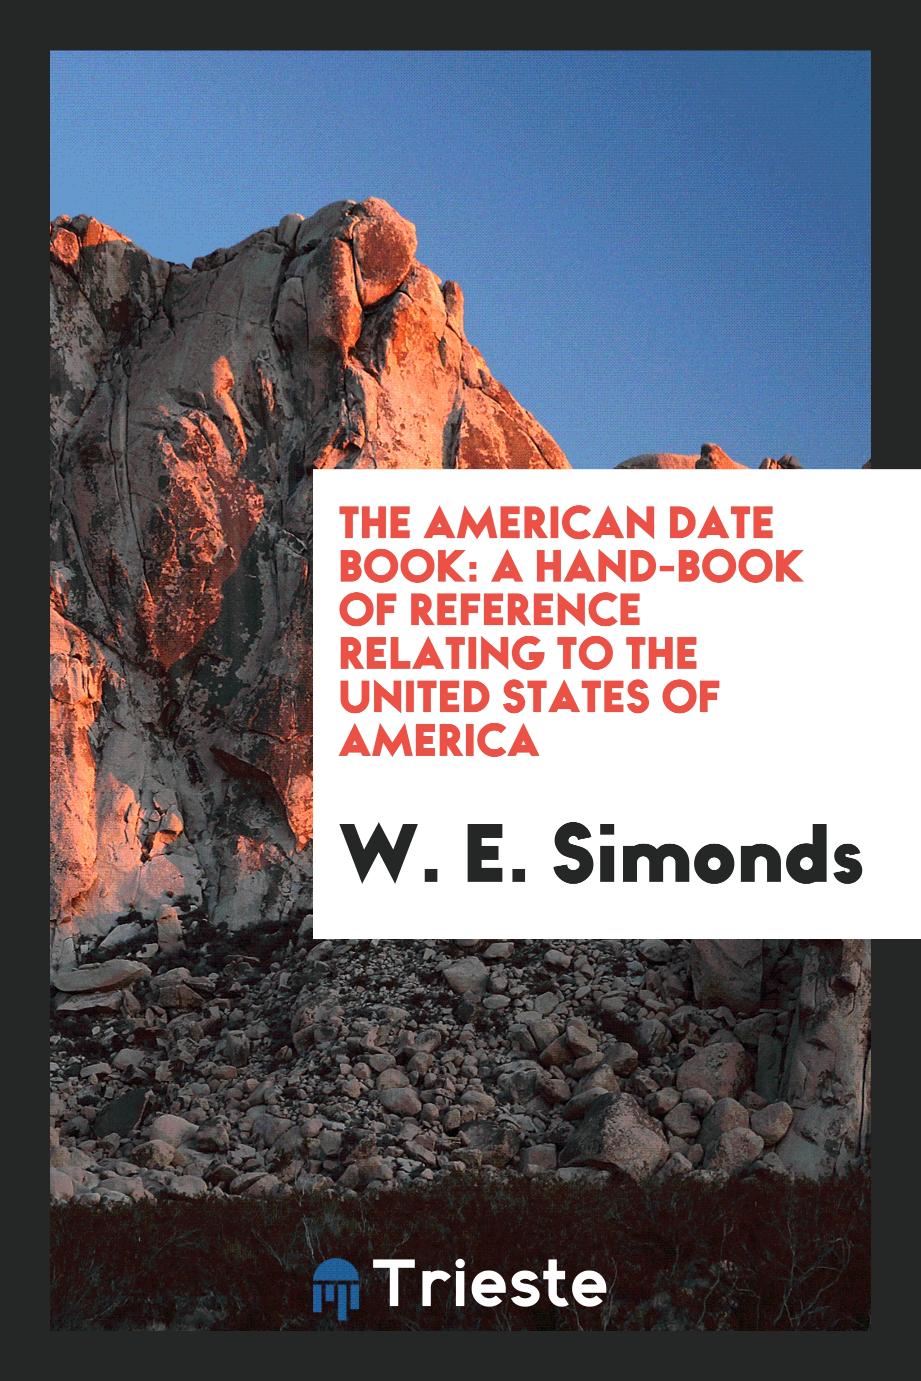 The American Date Book: A Hand-Book of Reference Relating to the United States of America